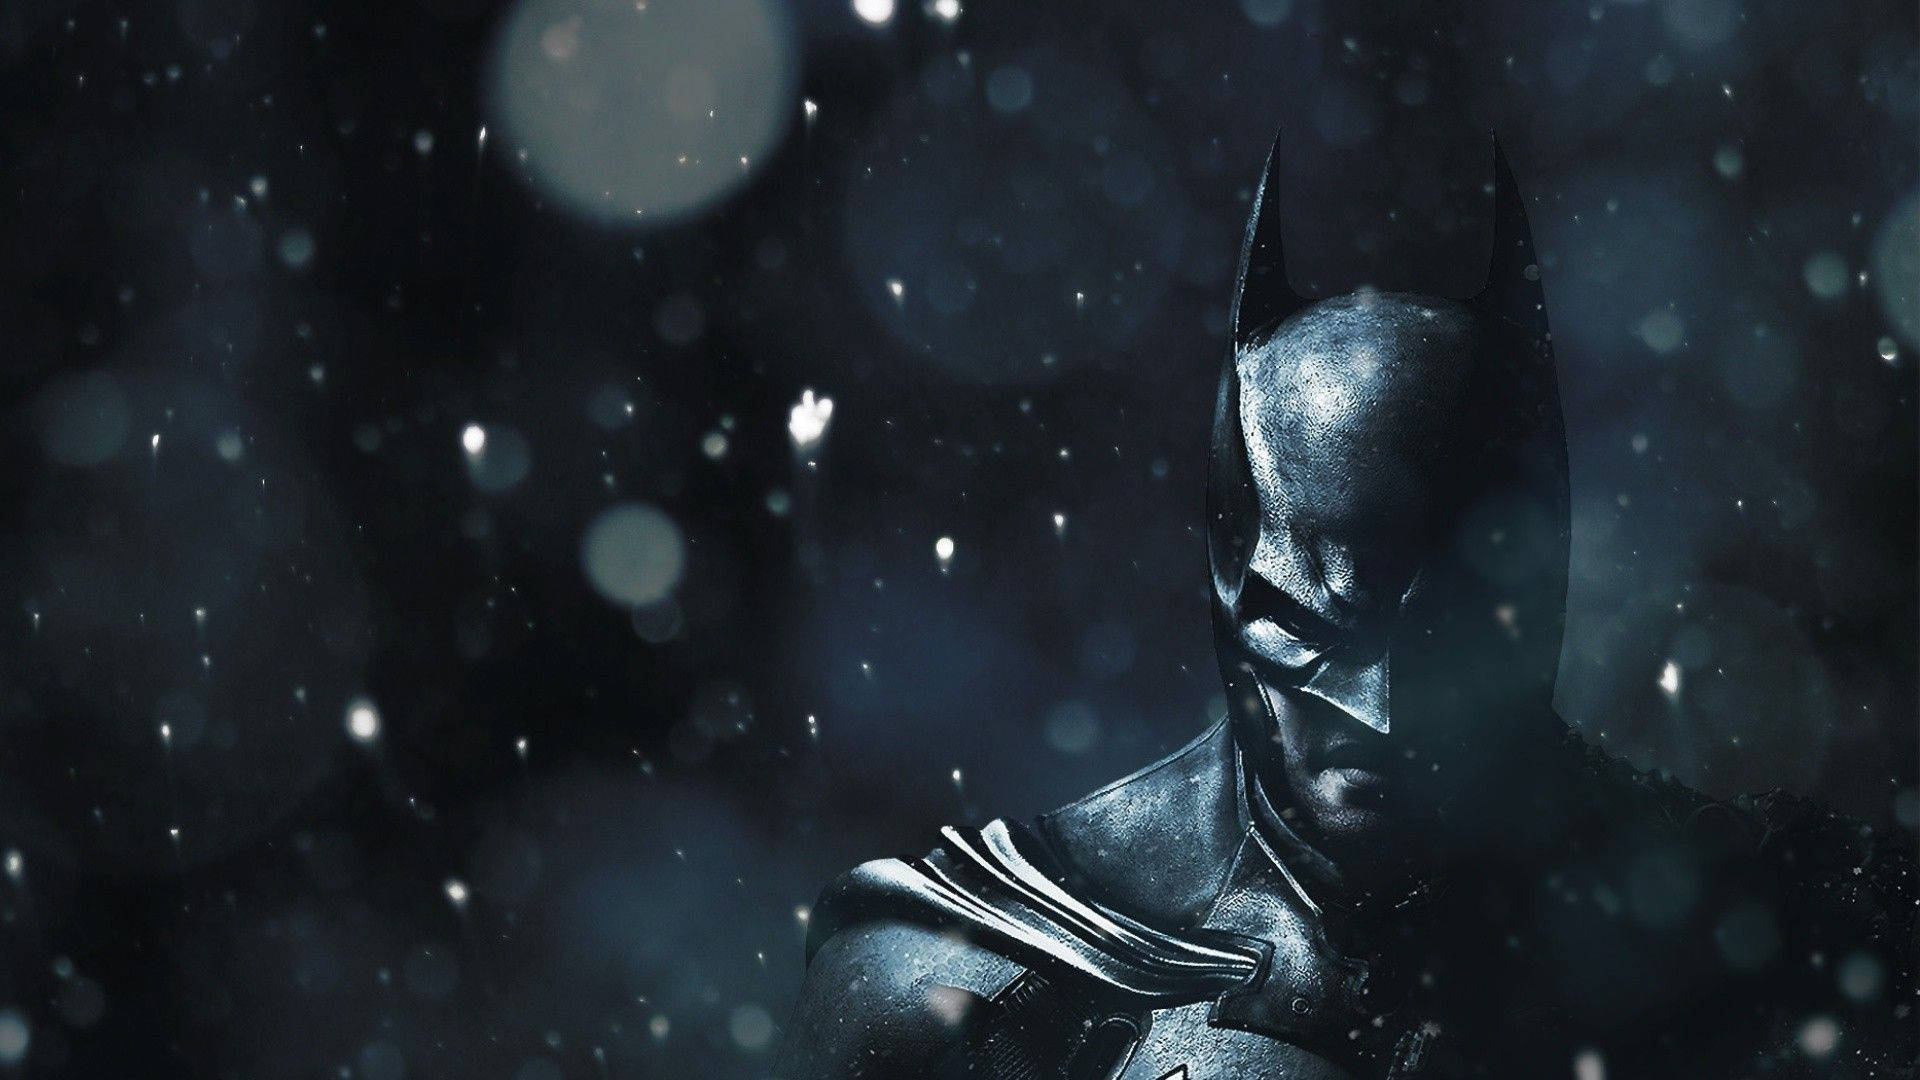 Batman backgrounds for free